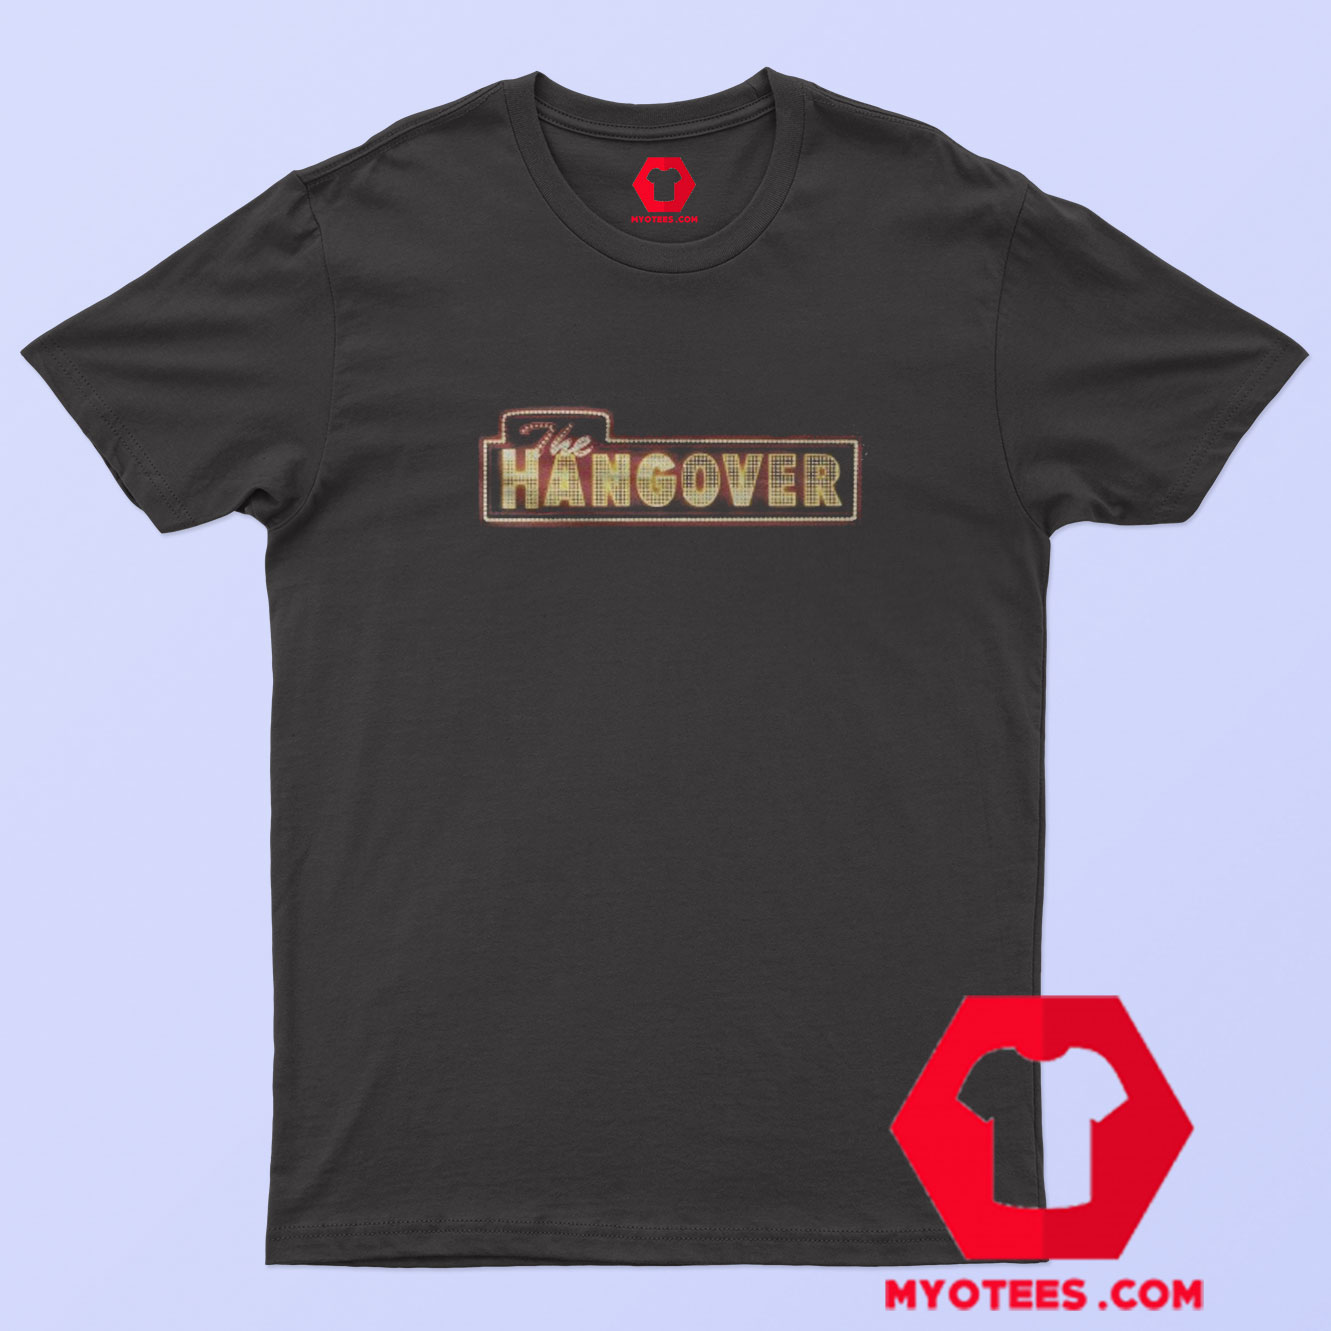 The Hangover Movie Graphic T-Shirt On Sale | myotees.com